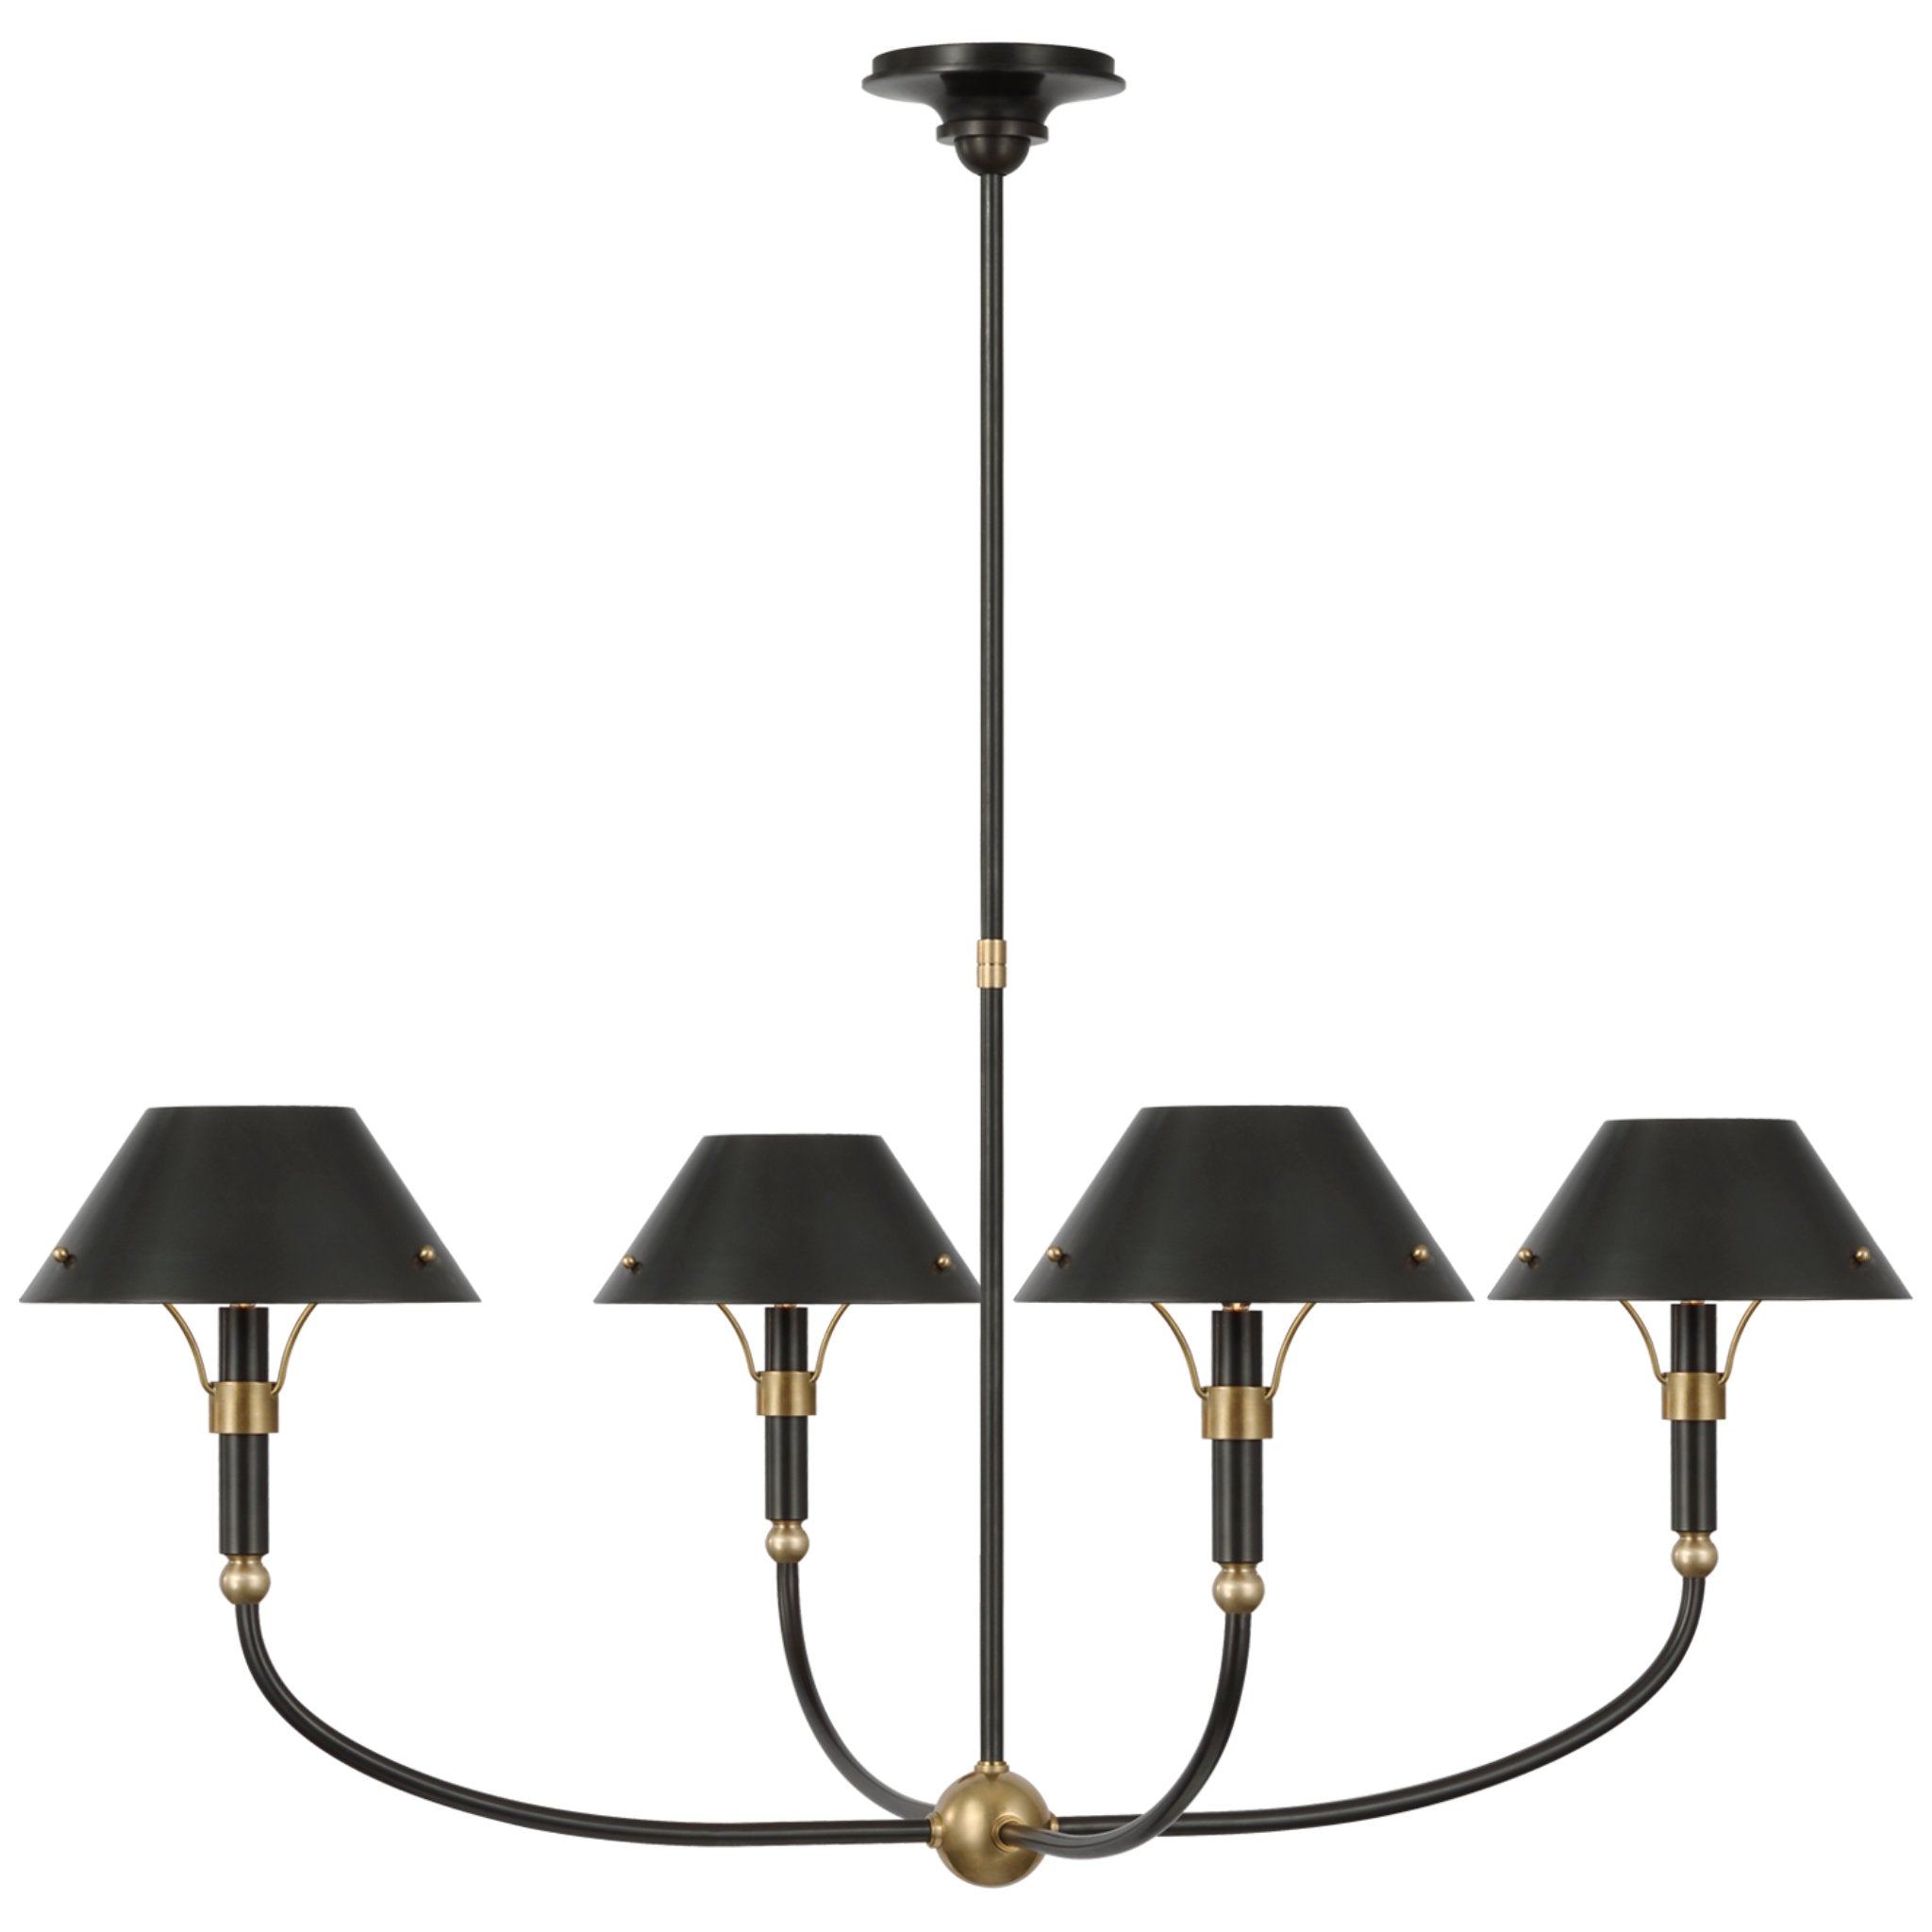 Thomas OBrien Alpha Chandelier in Antique Brass by Visual Comfort Signature  at Destination Lighting